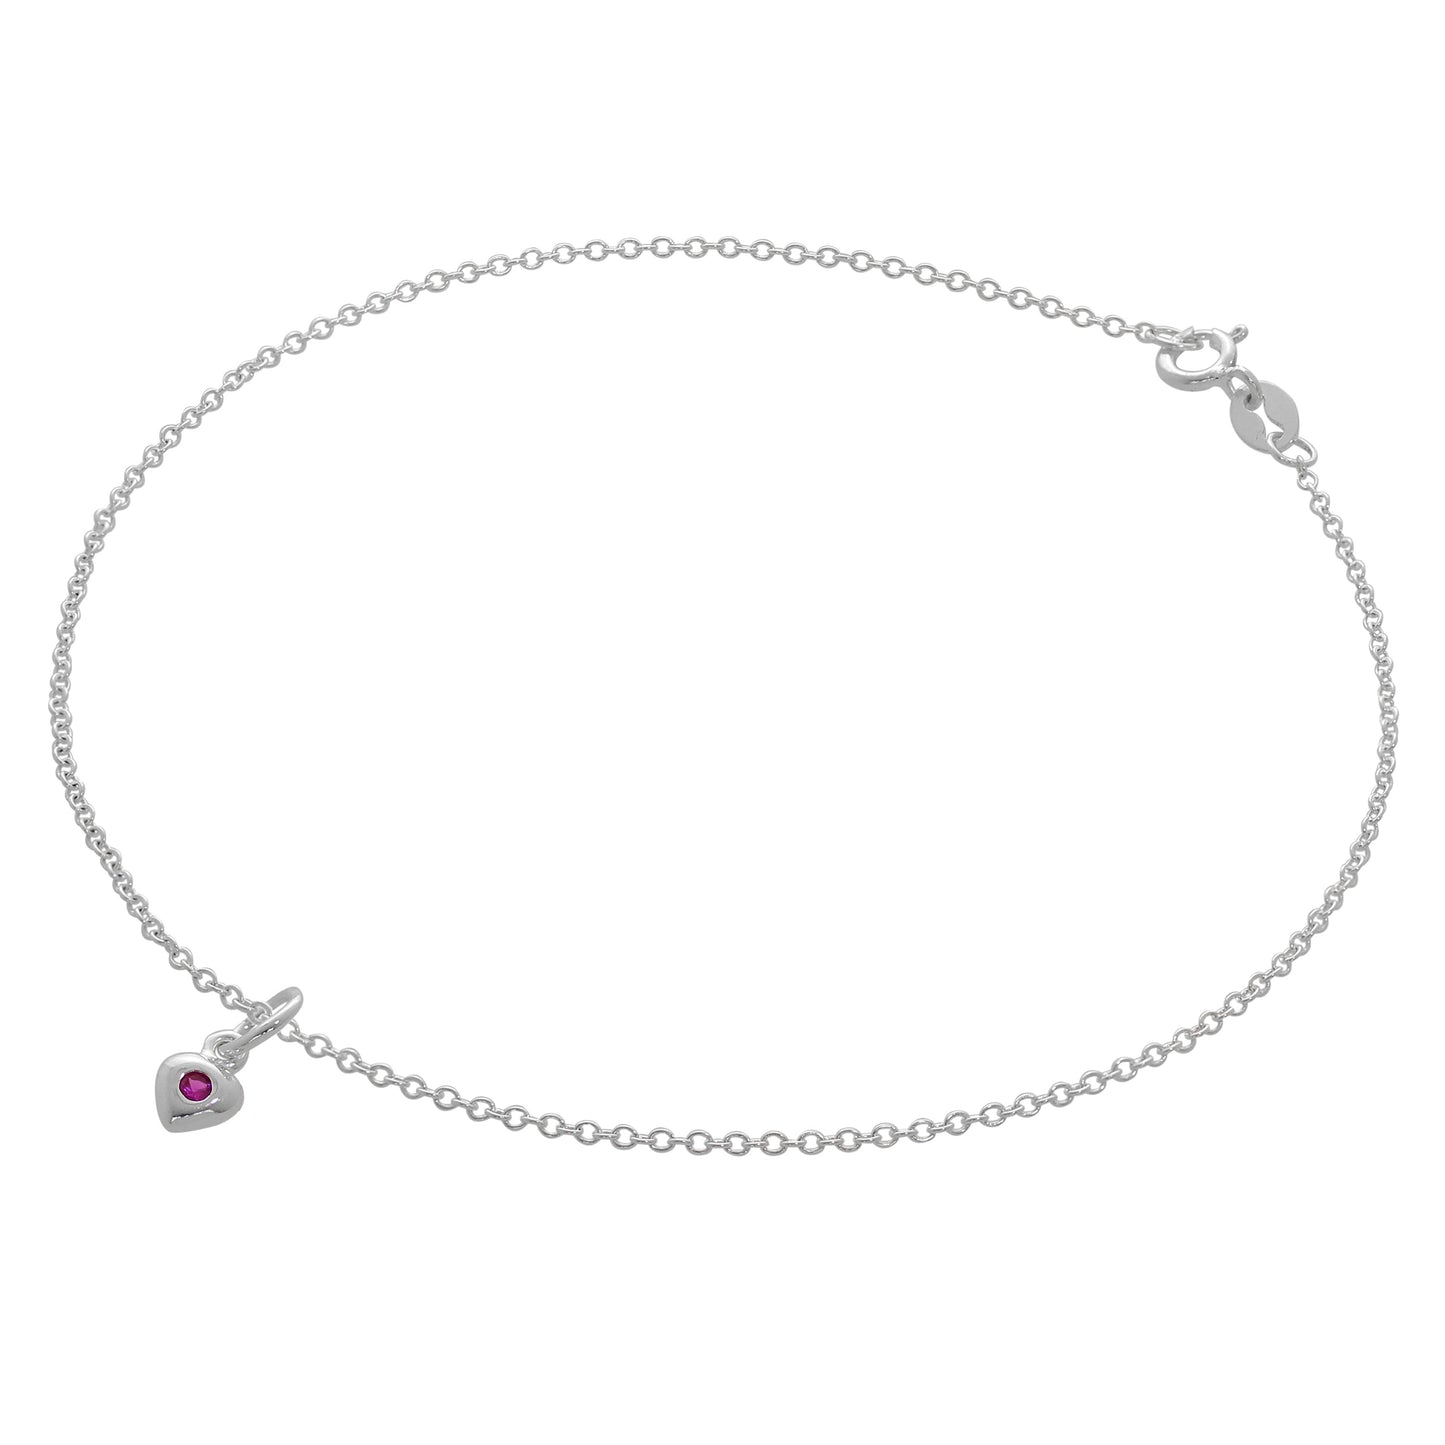 Fine Sterling Silver Belcher Anklet with CZ Crystal Birthstone Heart Charm - 10 Inches